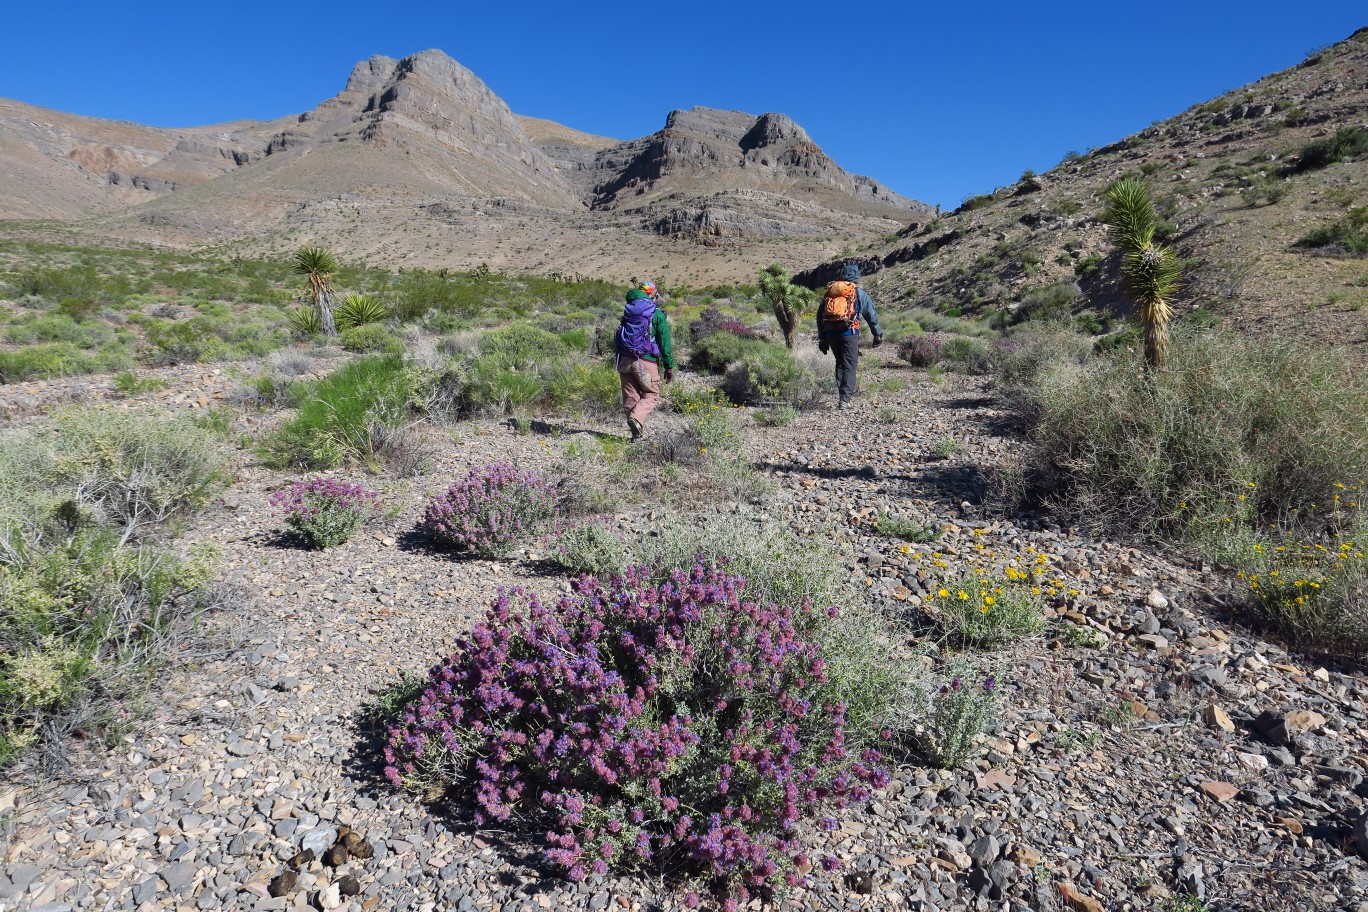 07-Ed_and_Luba_walking_through_wash_with_lots_of_blooming_purple_sage